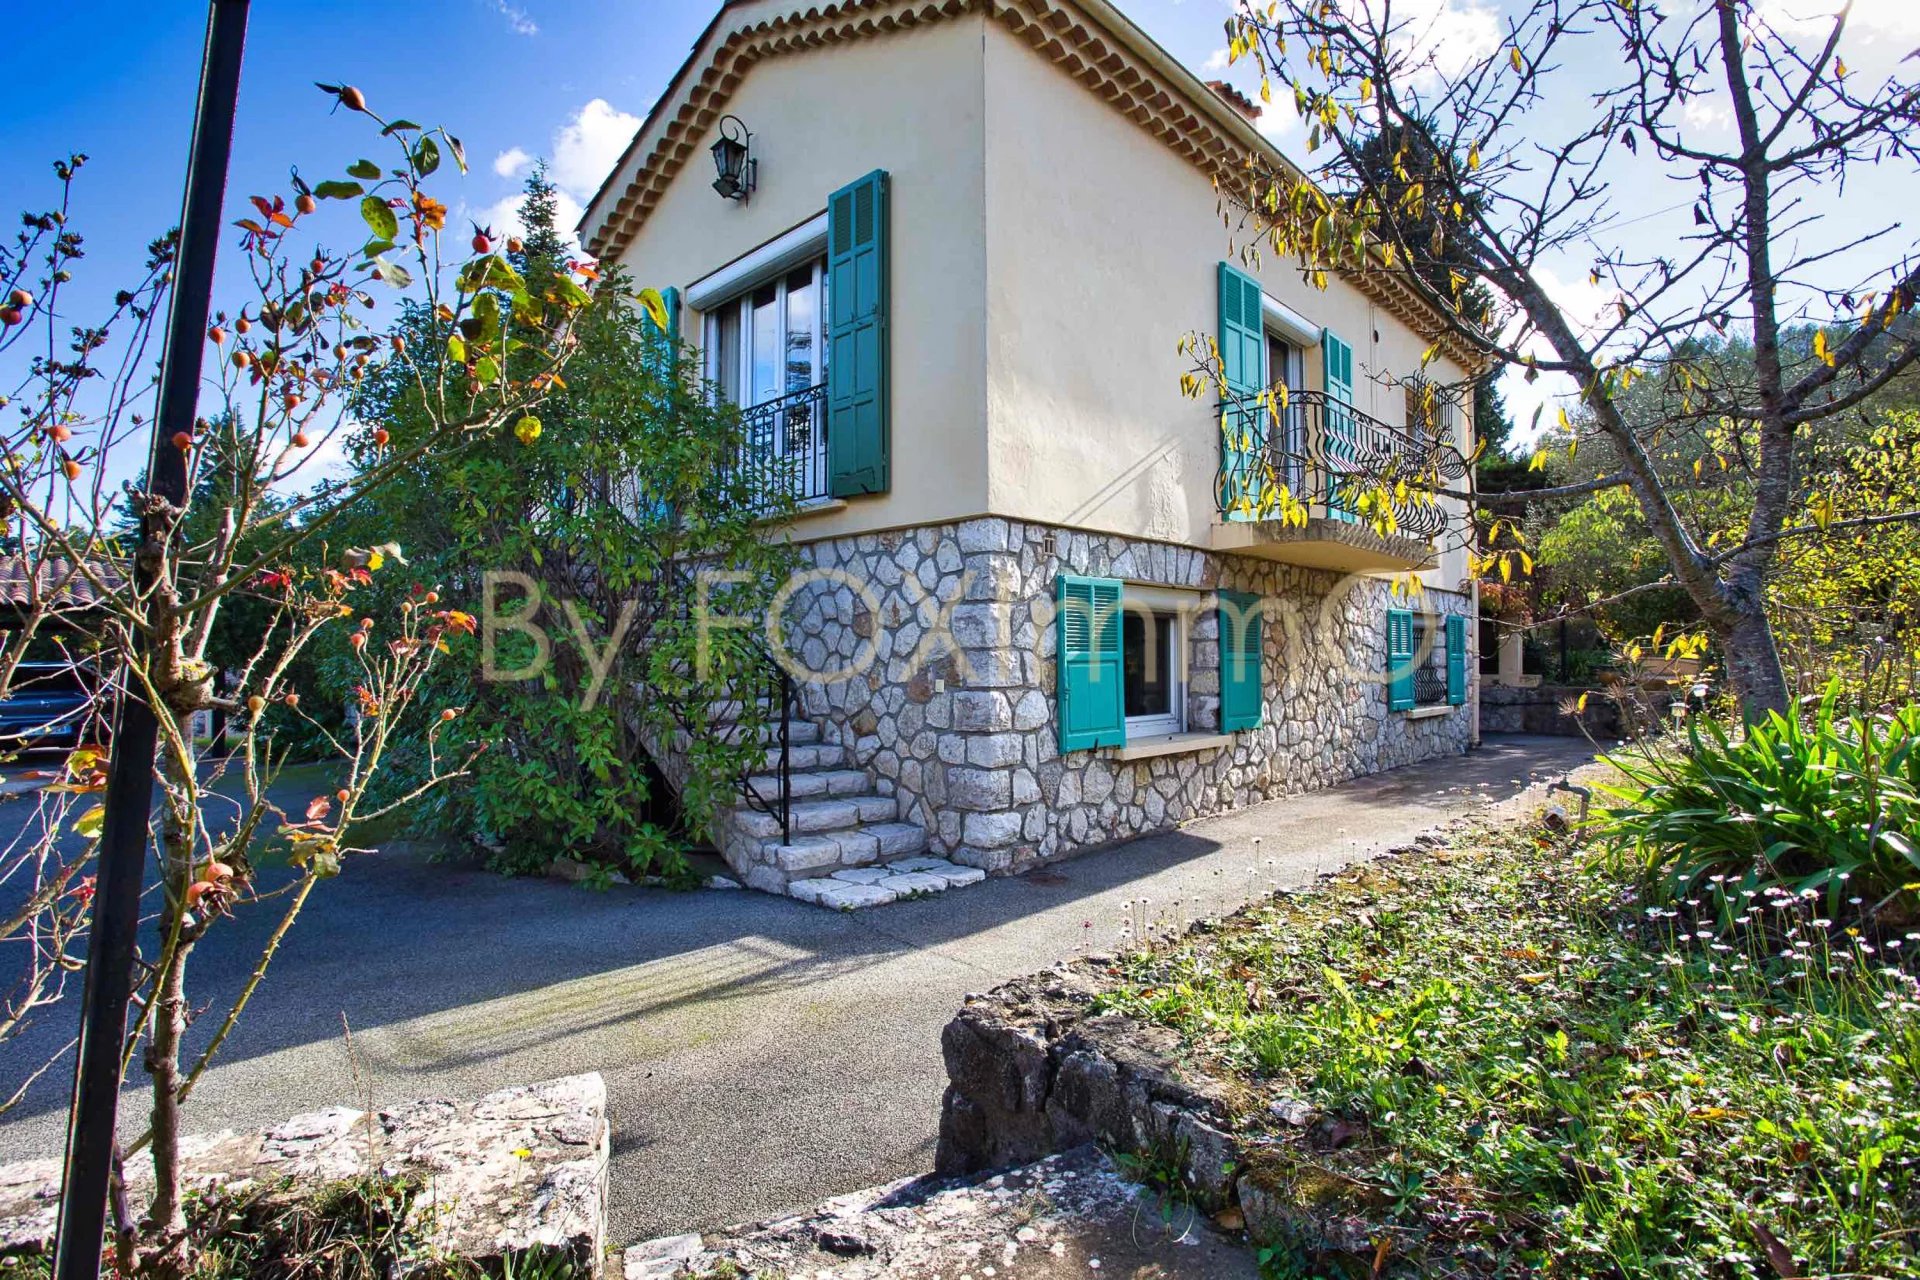 SOLD 6P family villa at walking distance from the village with pool